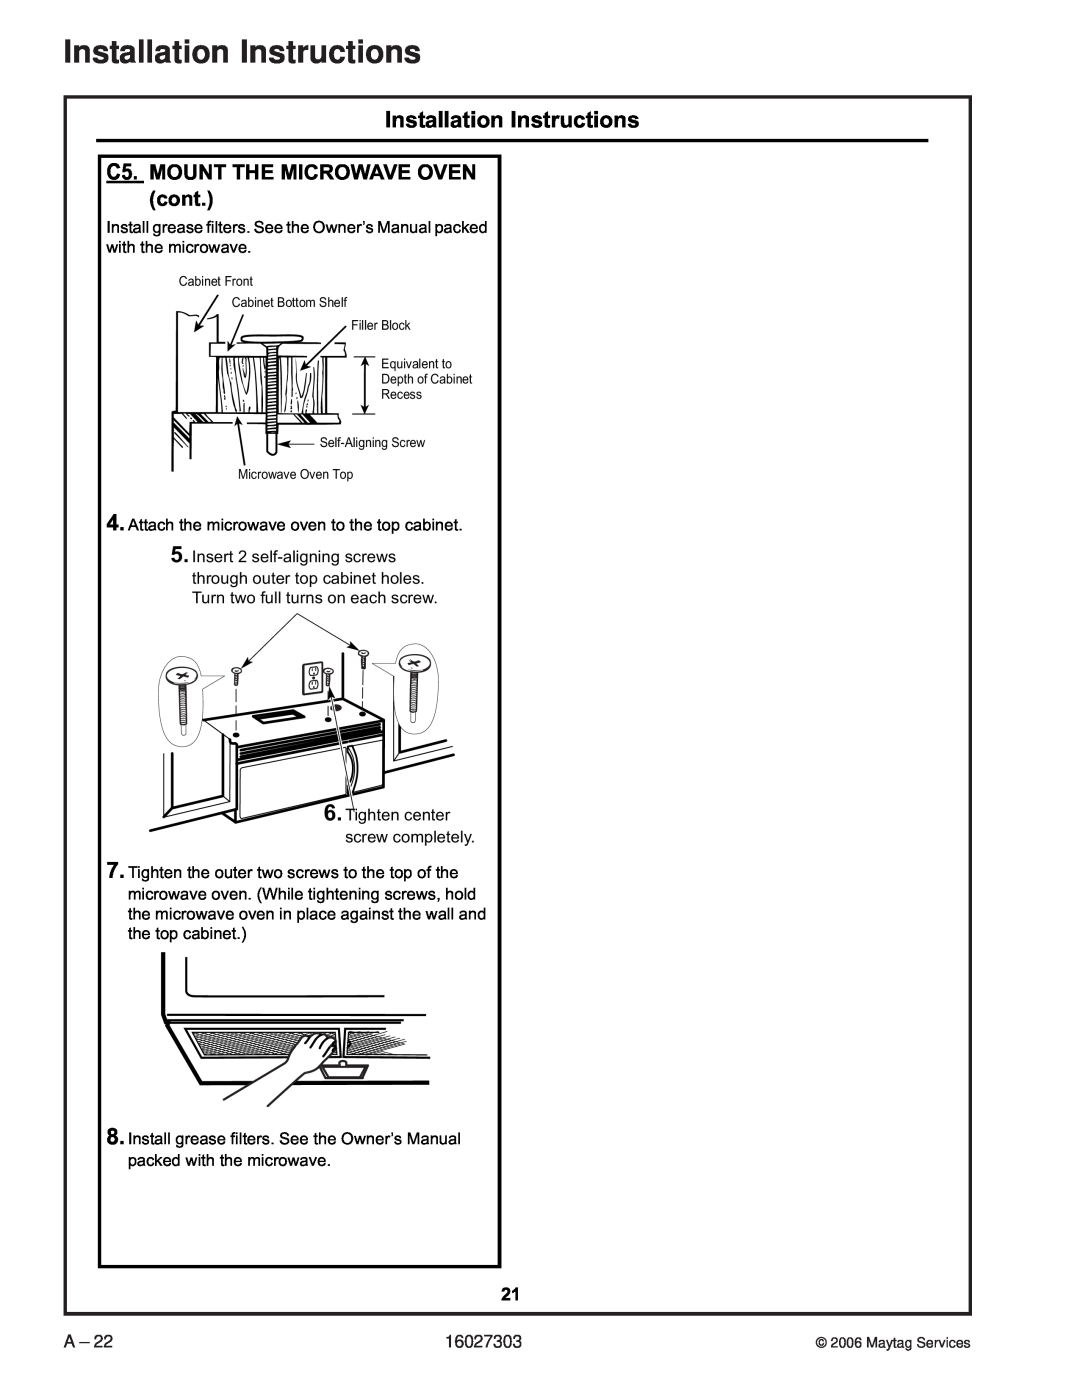 Maytag UMV1152CA manual C5.MOUNT THE MICROWAVE OVEN cont, Installation Instructions 